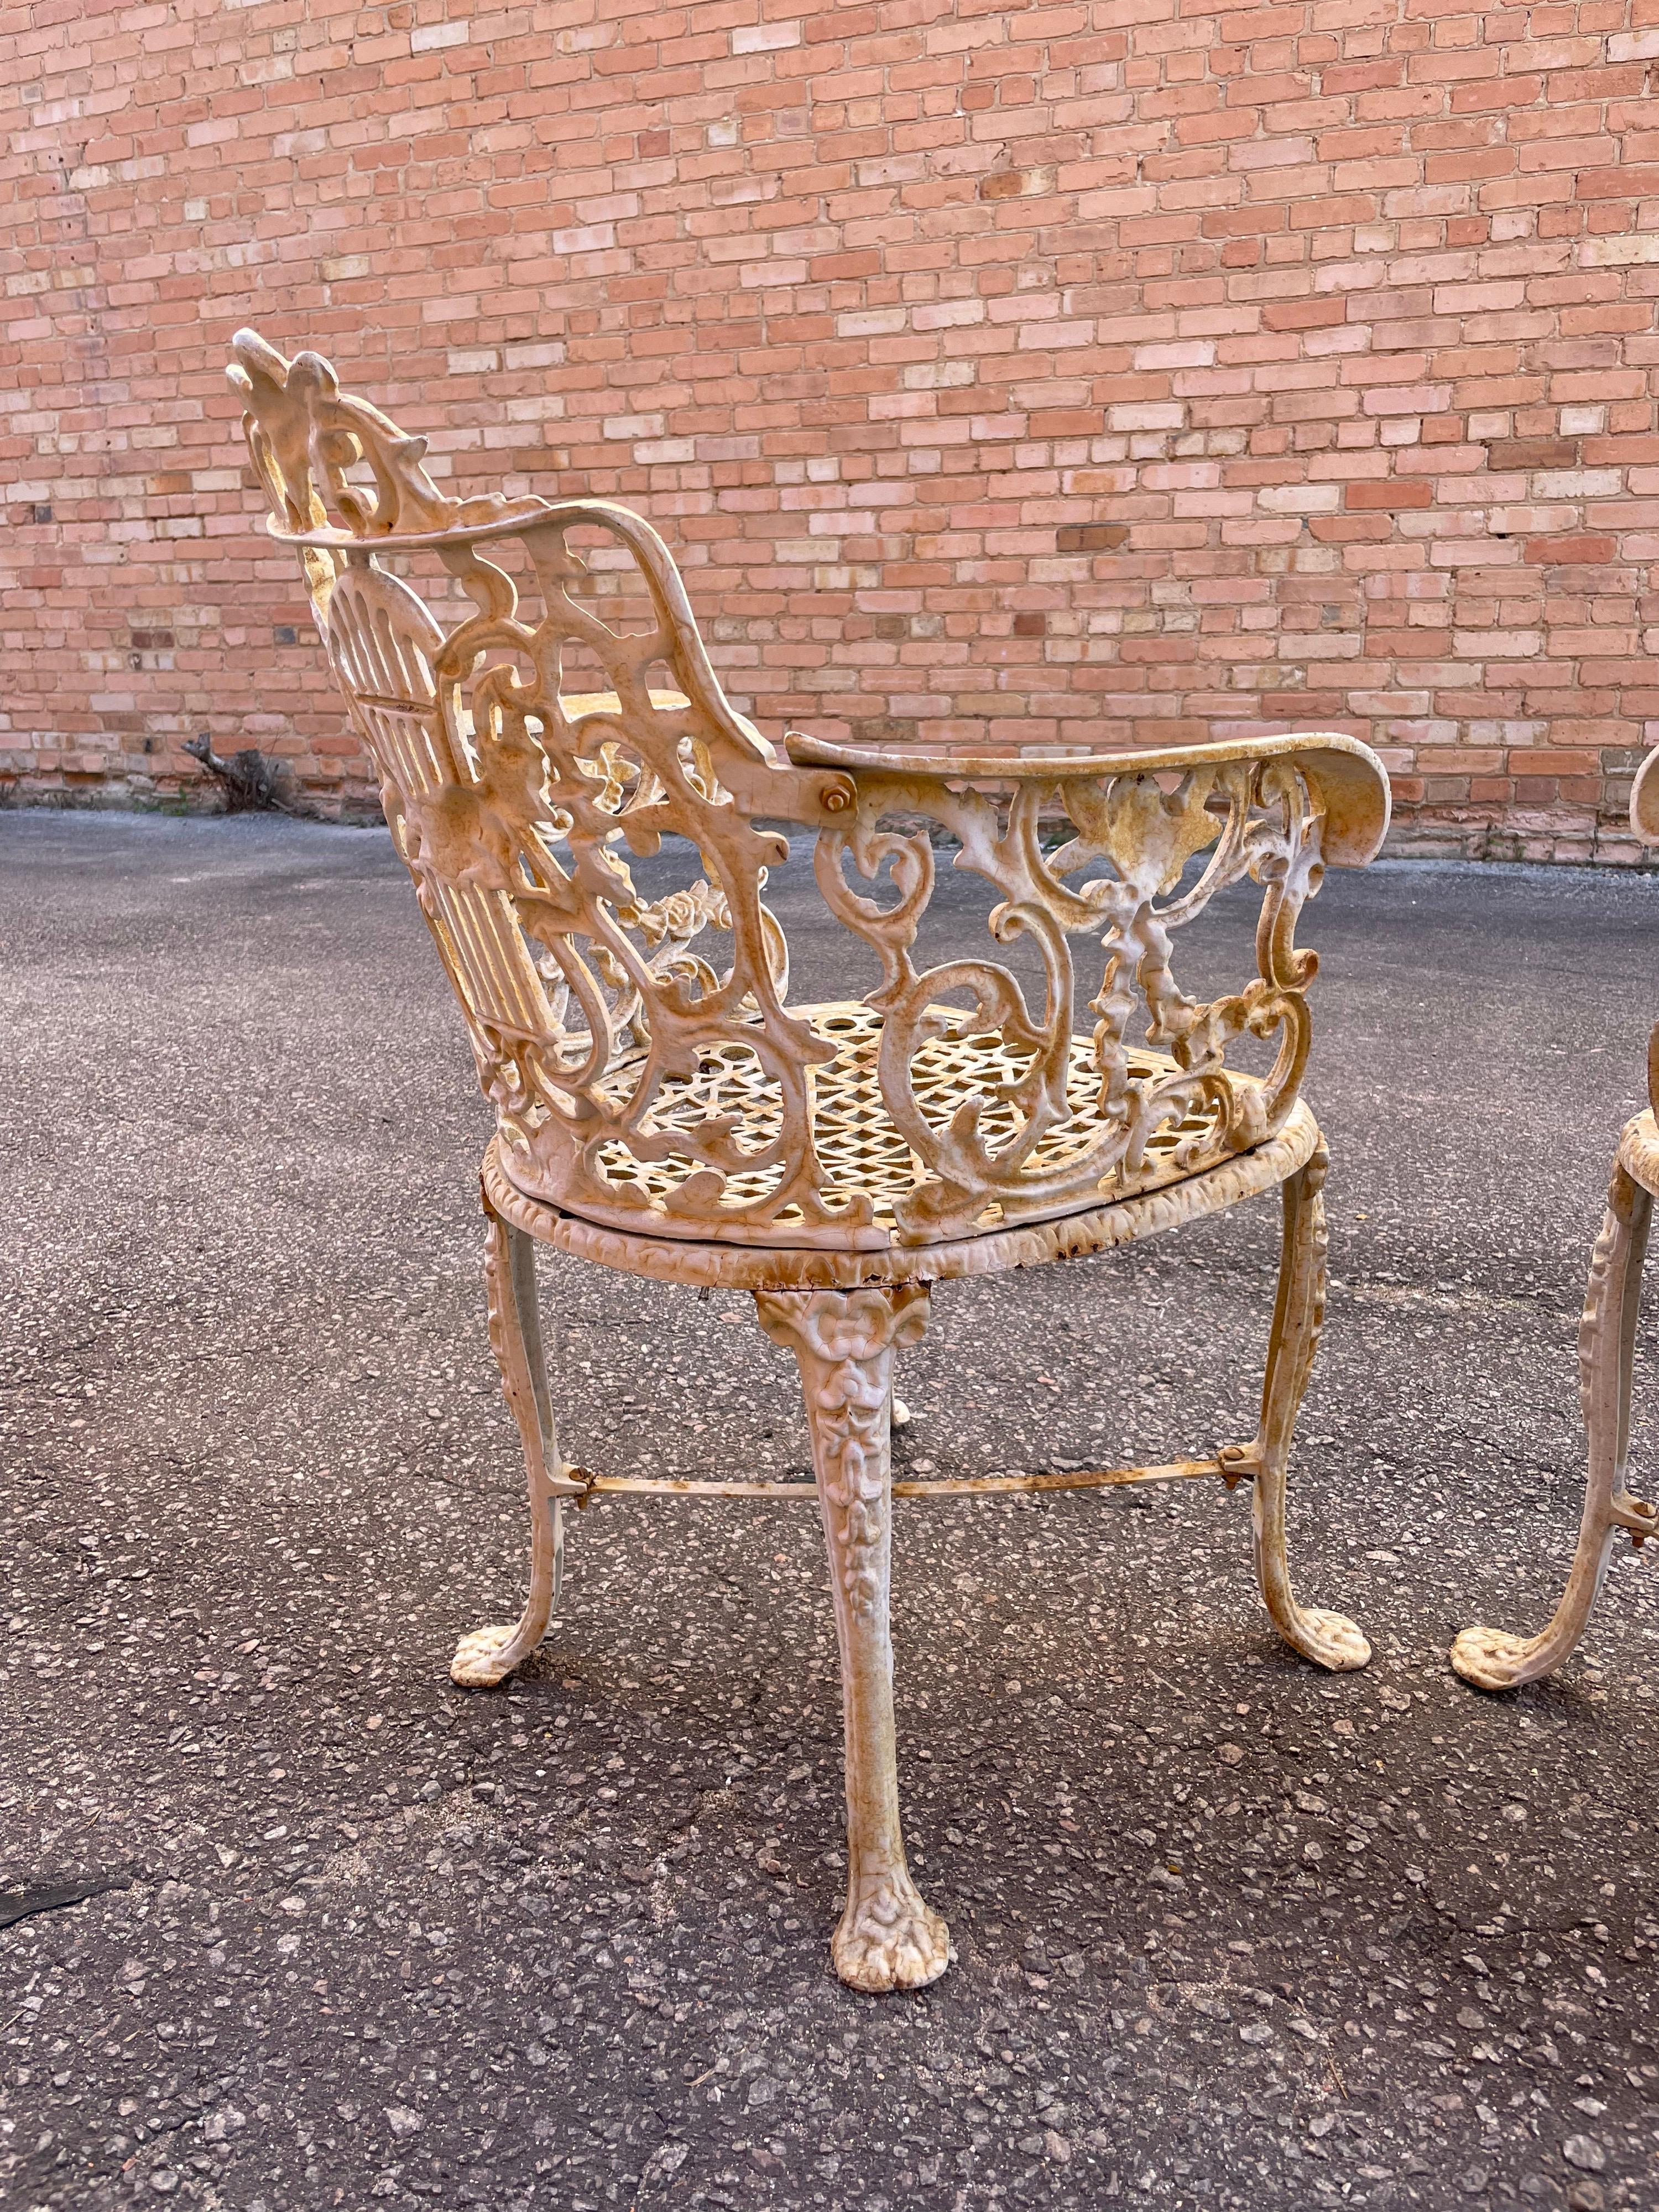 1860s Antique Neoclassical Robert Wood Cast Iron Chairs, a Pair For Sale 7